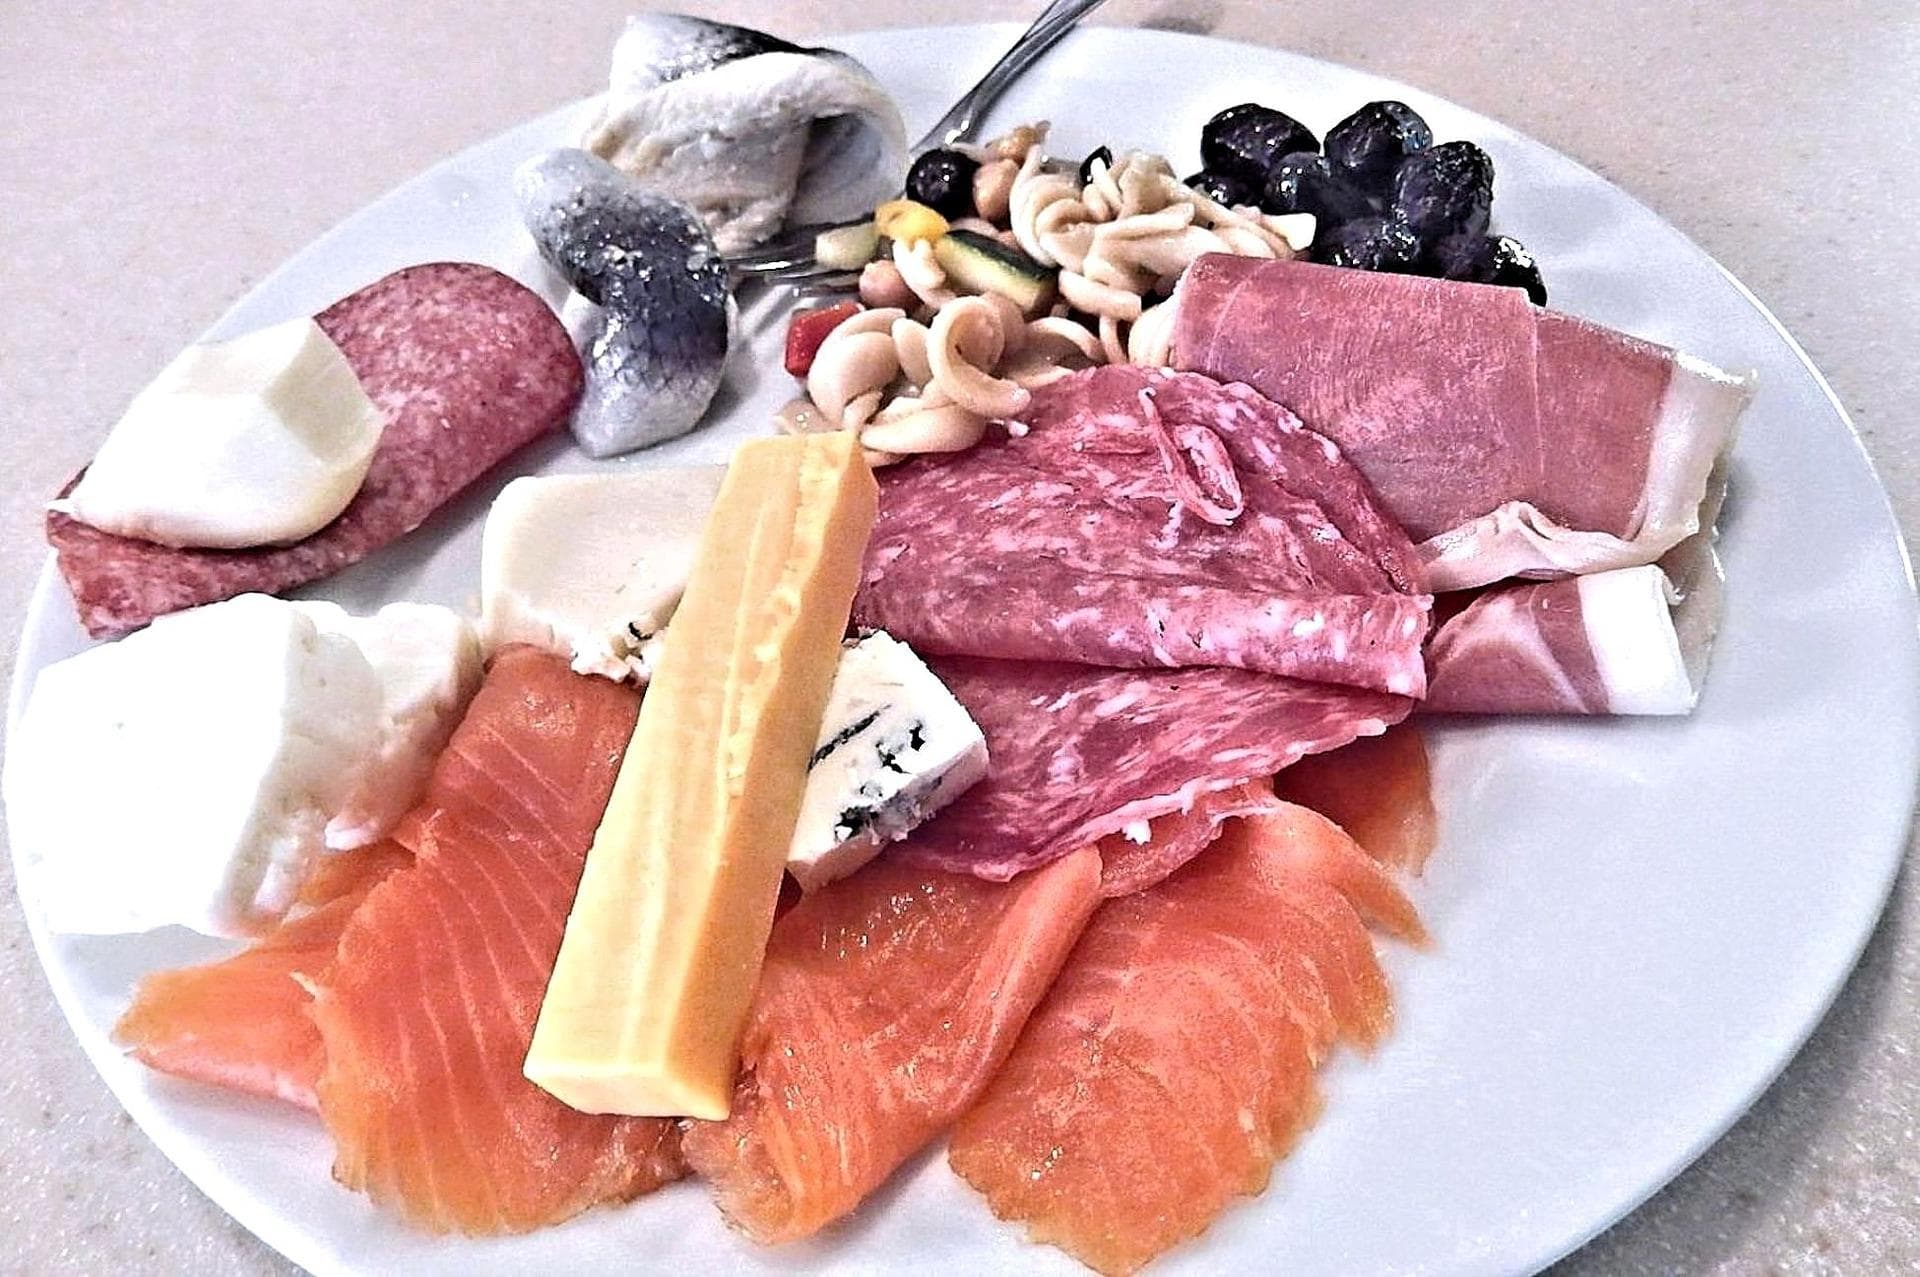 Prosciutto with other meats